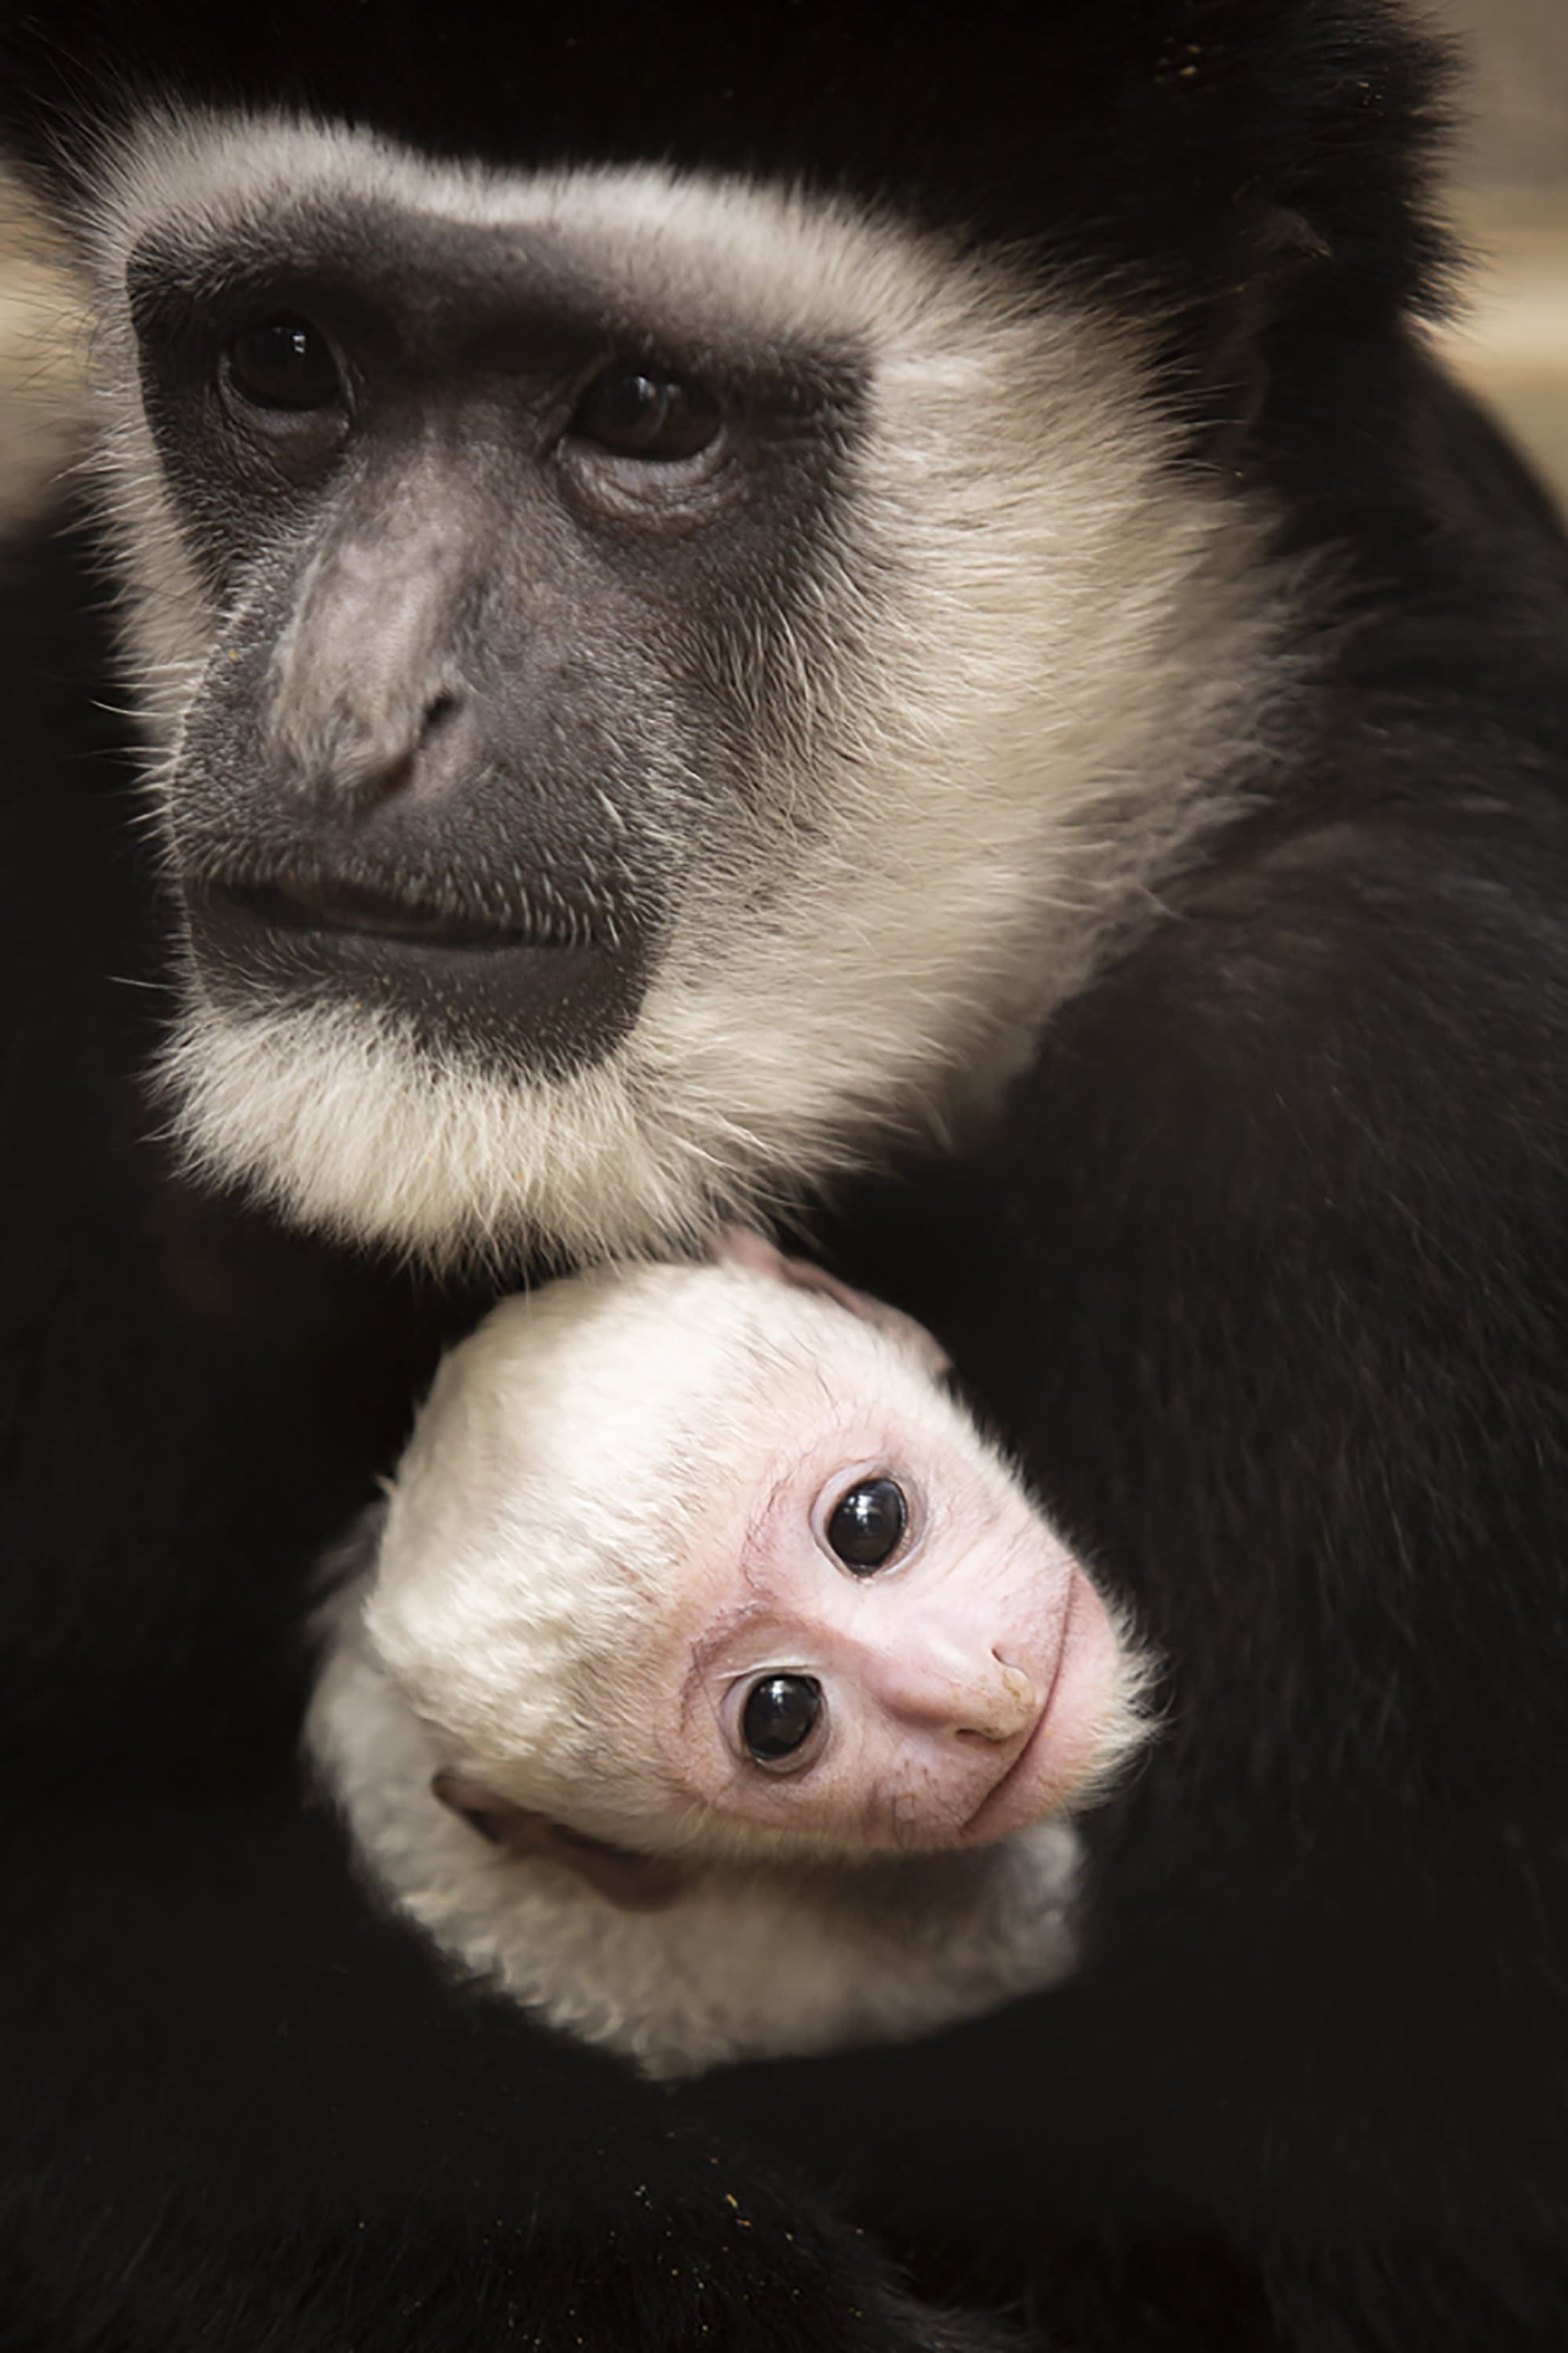 New colobus monkey makes debut at St. Louis Zoo